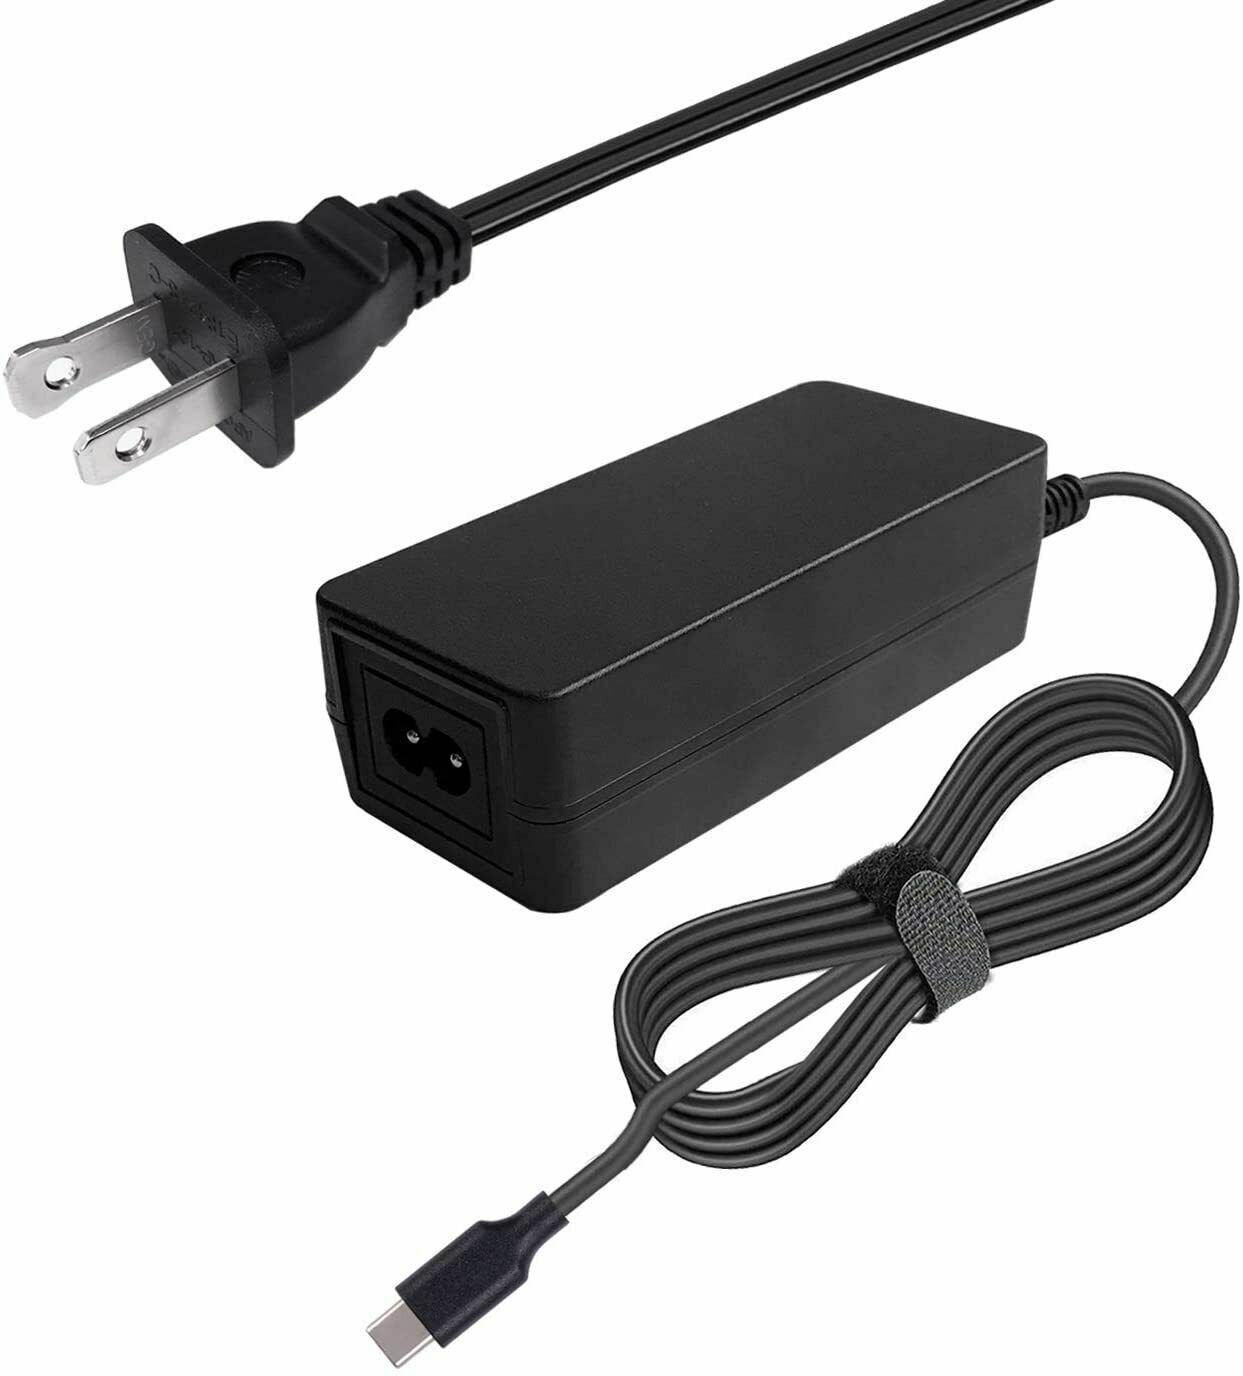 Charger For Lenovo 100e Chromebook Gen 4 G4 82W0 82W00001US AC Adapter Power